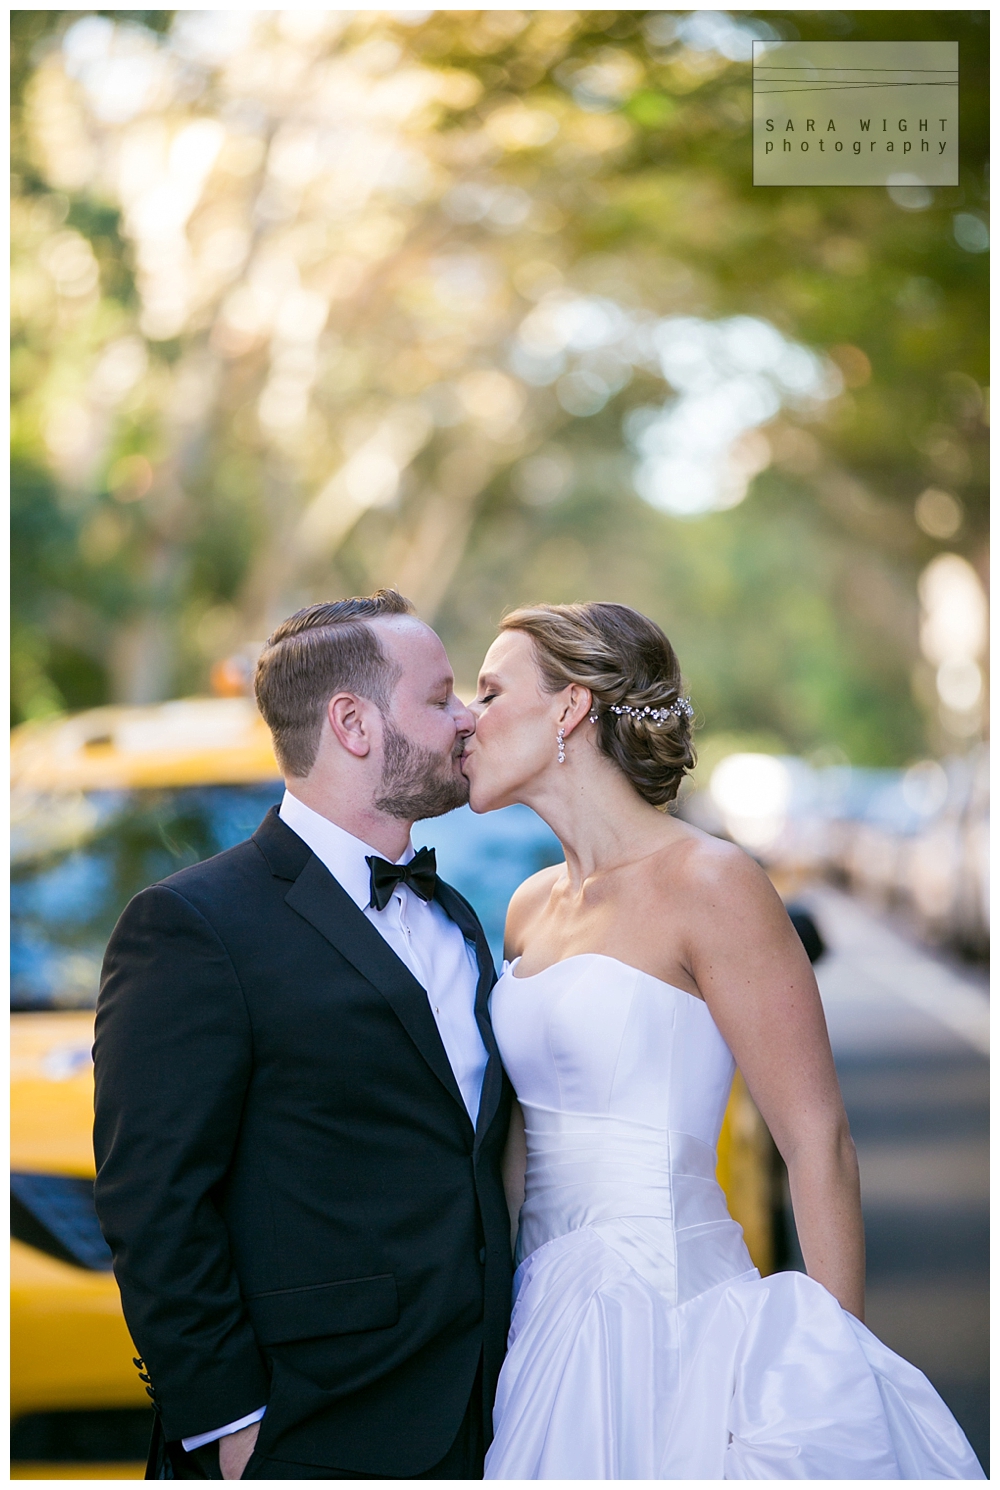 Lighthouse at Chelsea Piers Wedding, Sara Wight Photography_0006